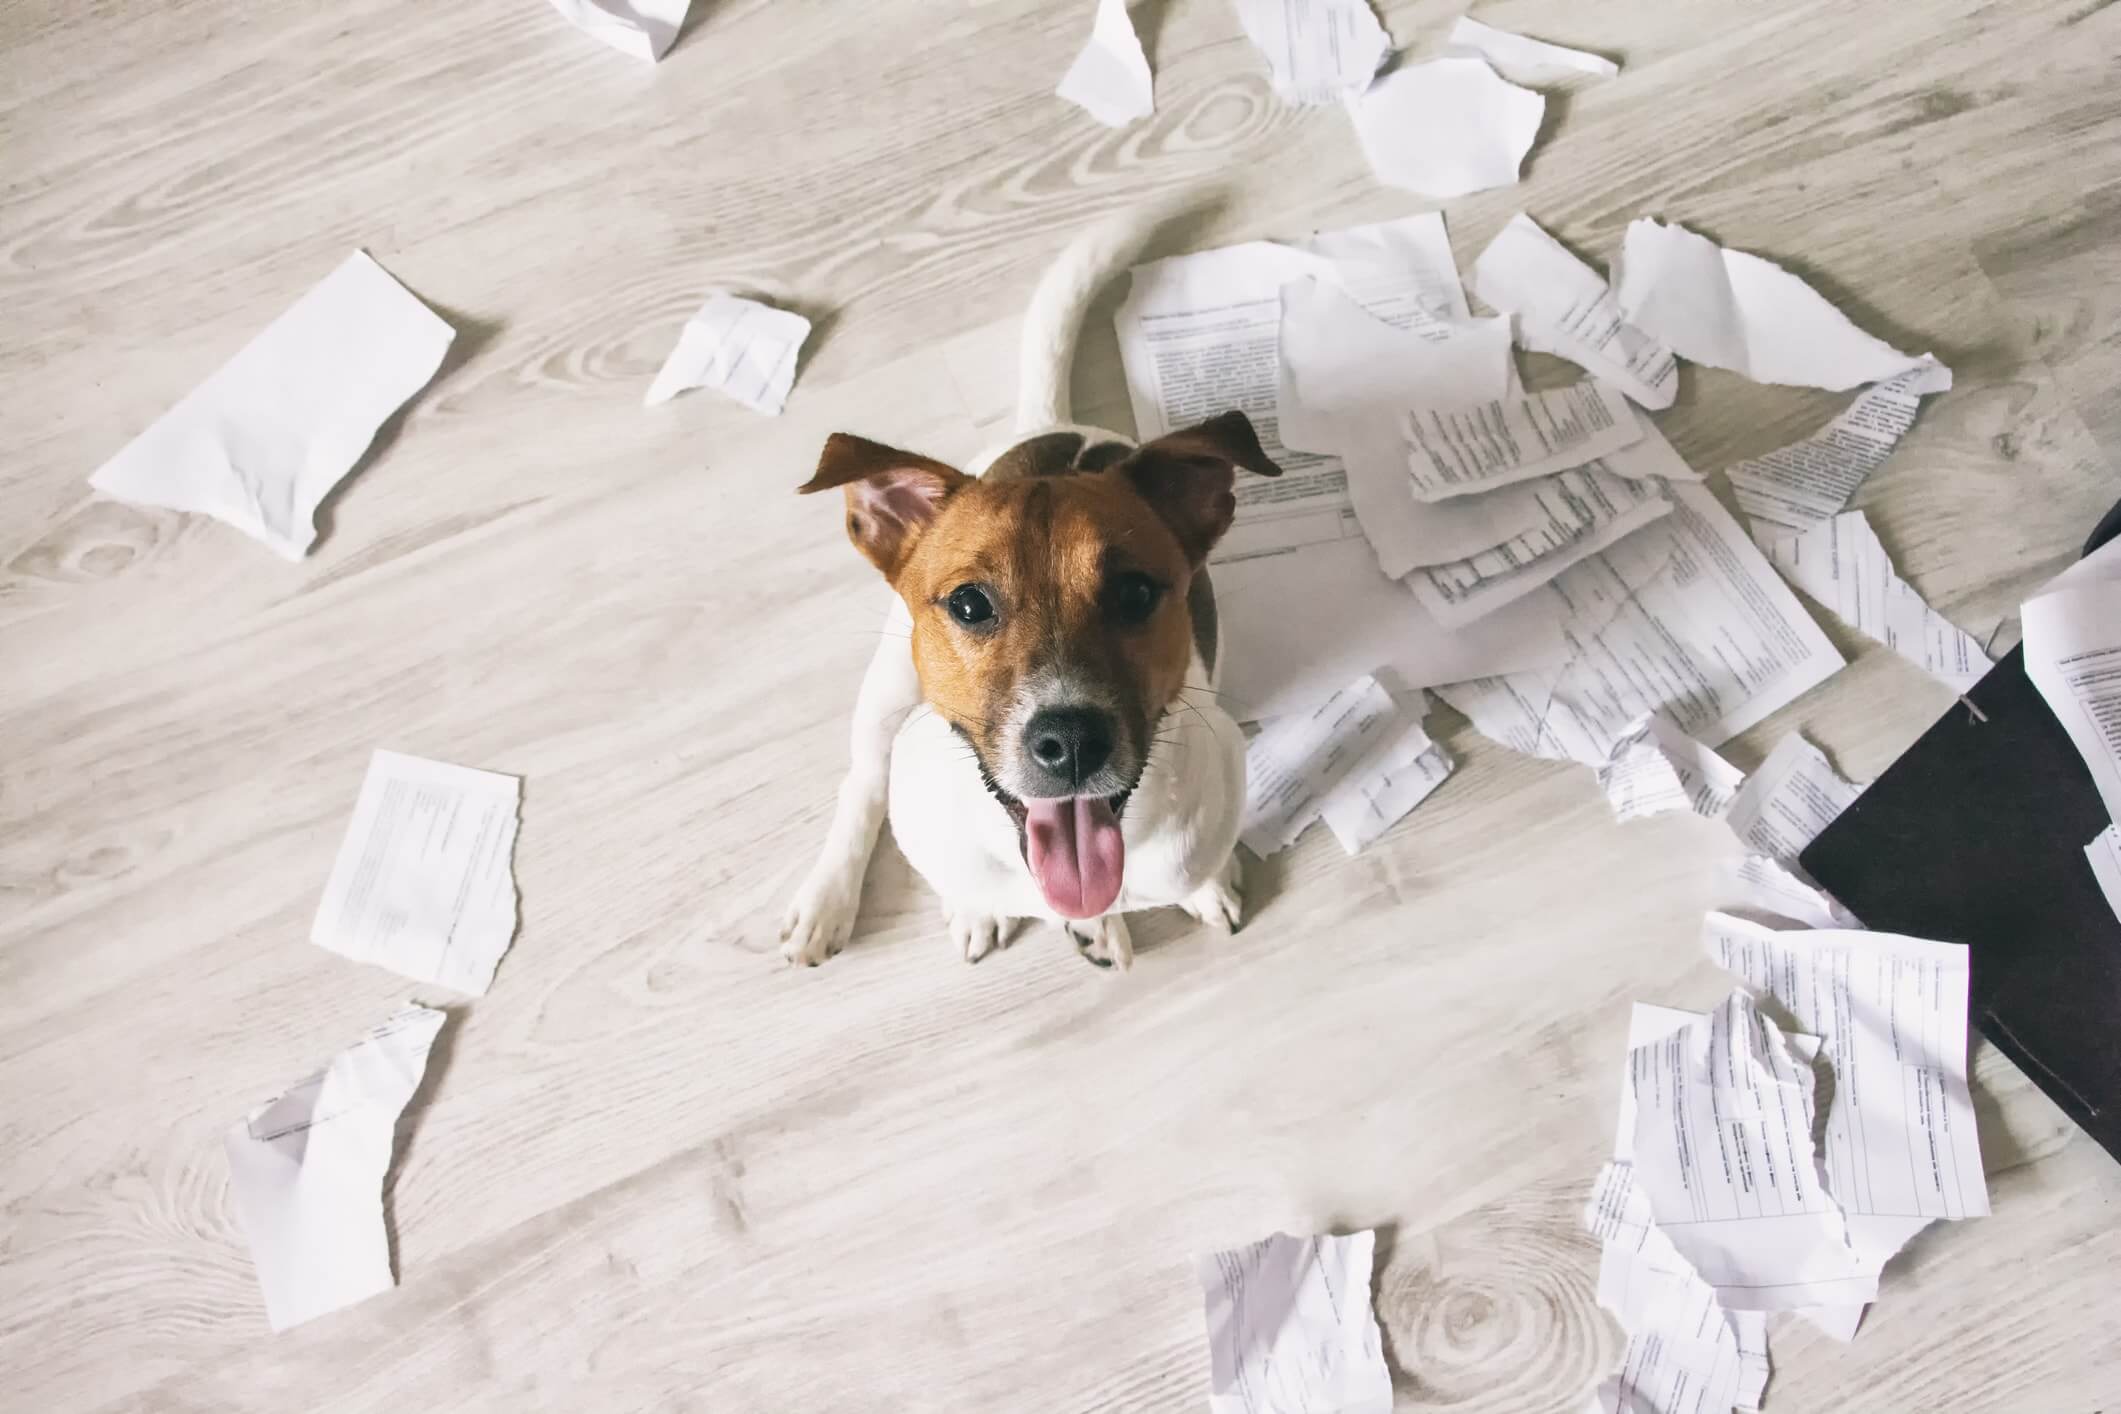 Dog chewed up paper